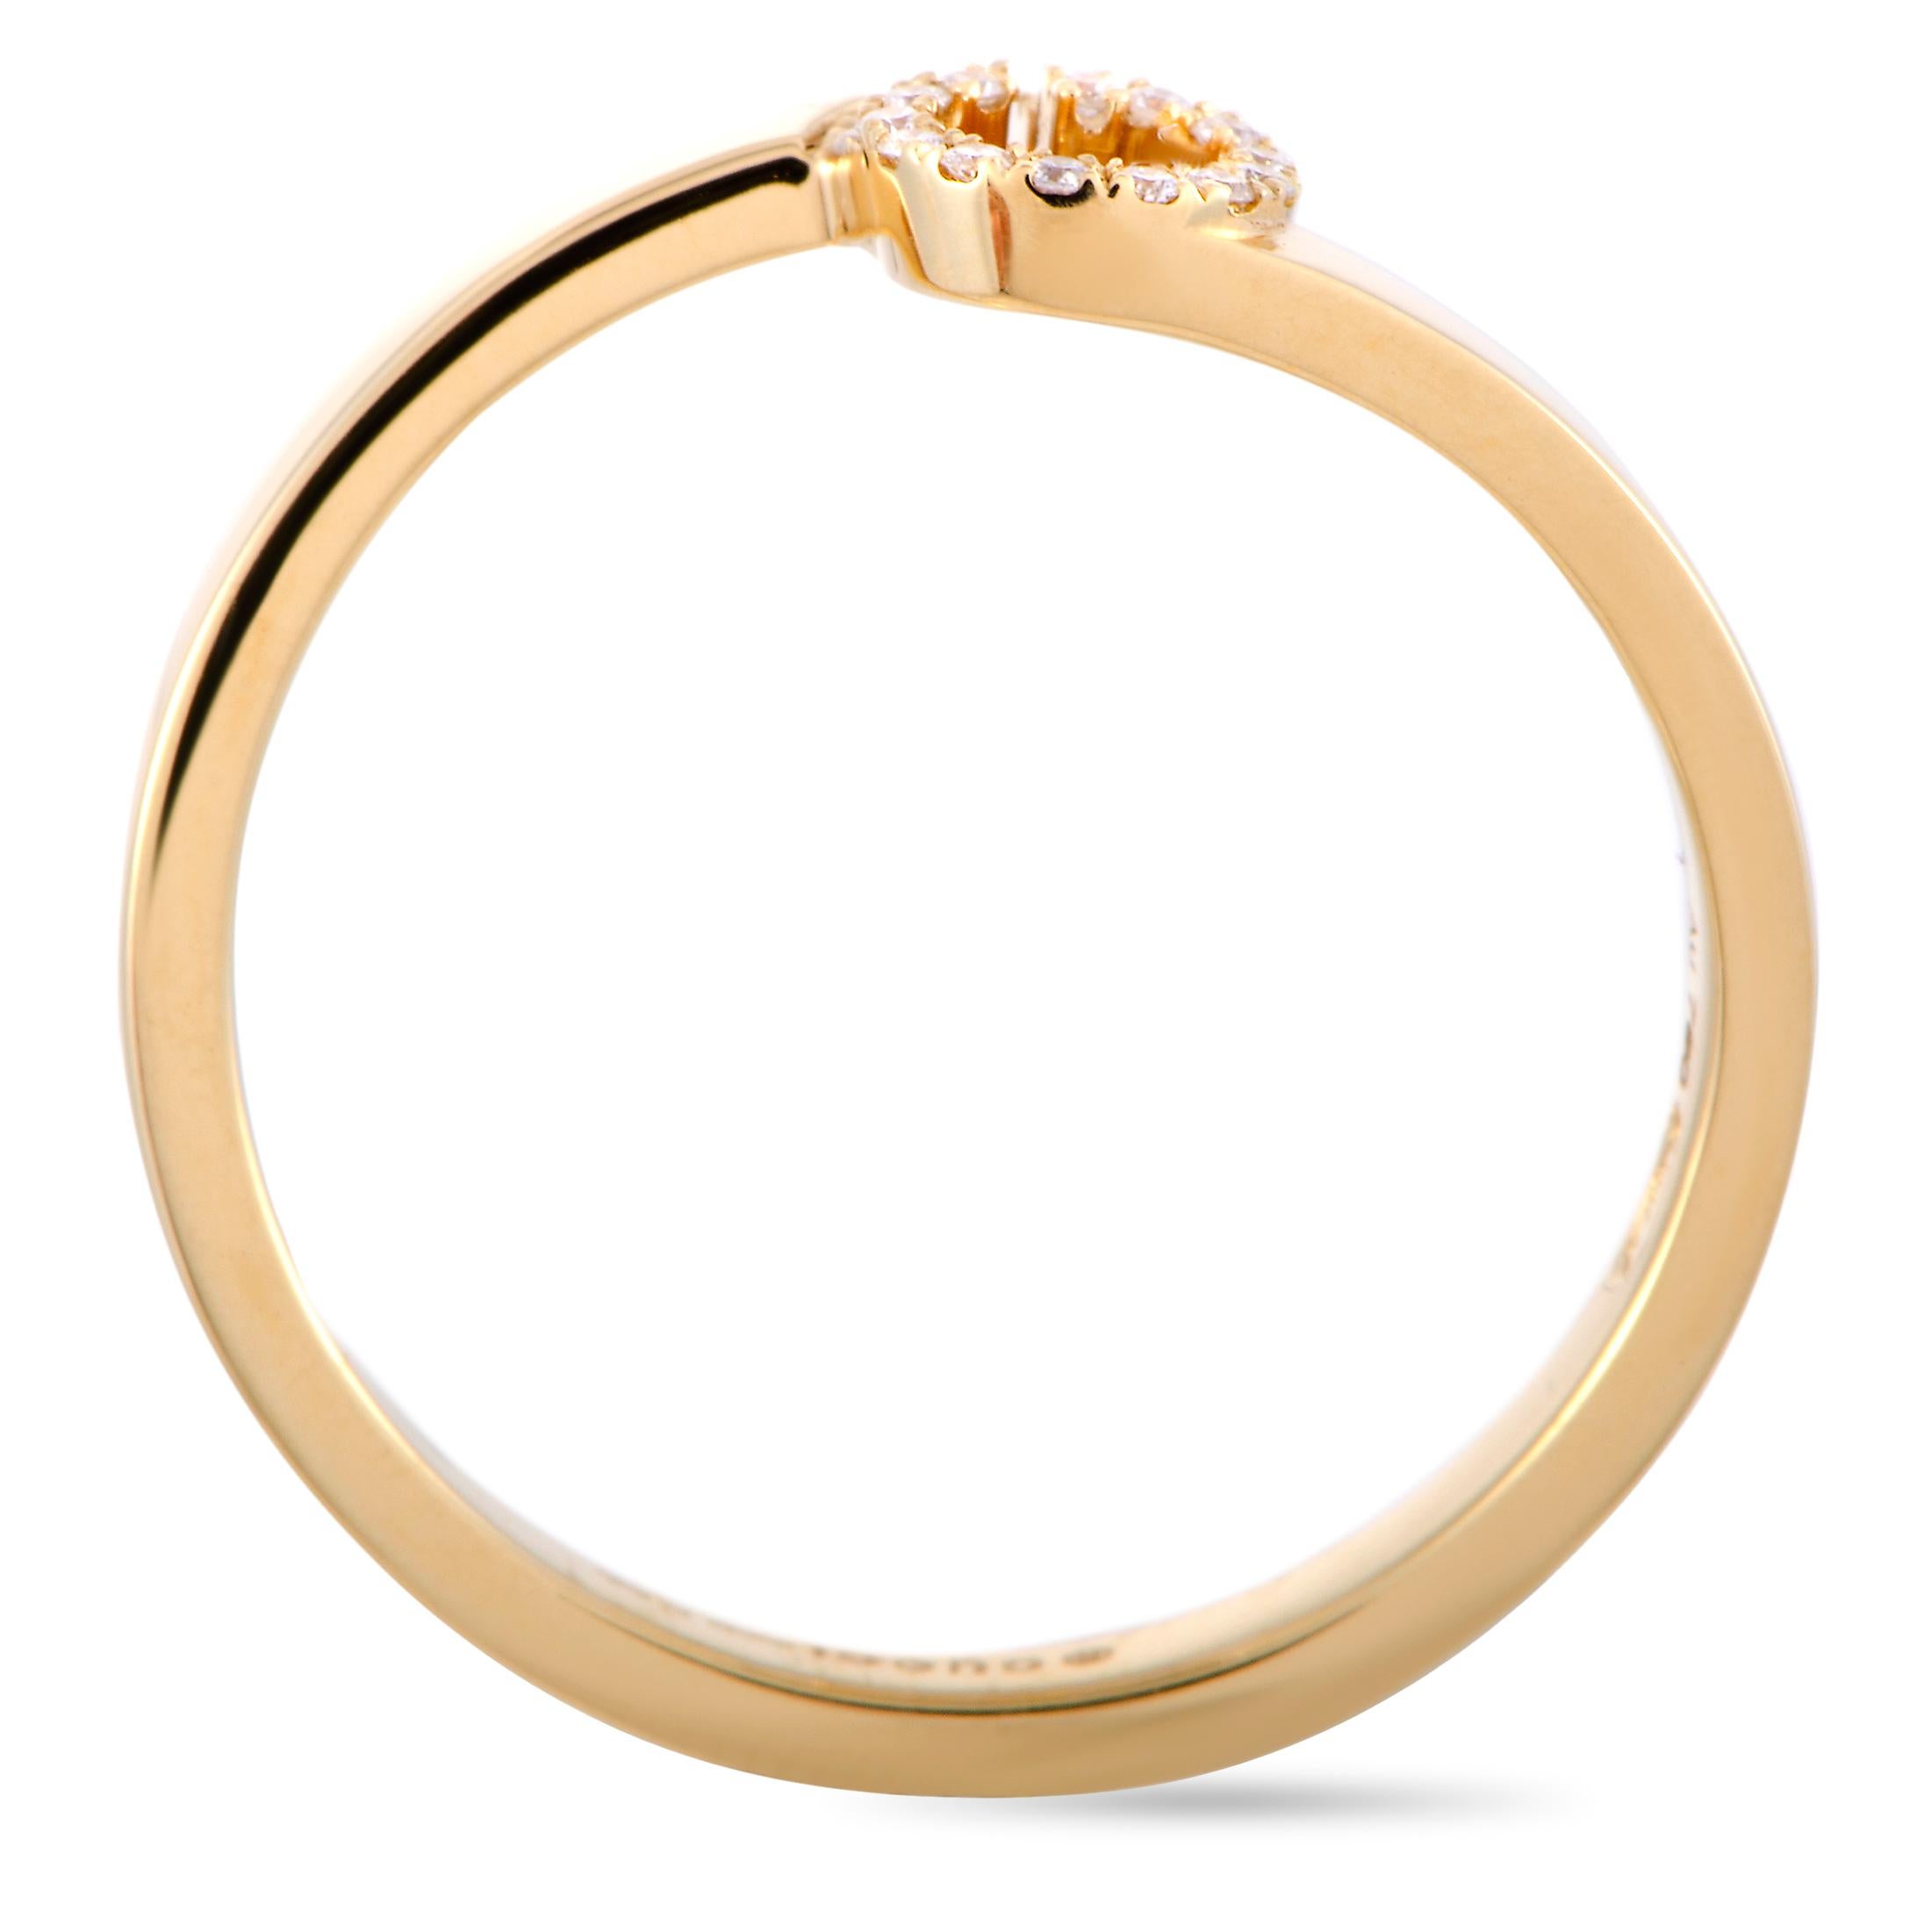 The “GG Running” ring by Gucci is made out of 18K yellow gold and diamonds and weighs 2.5 grams. The diamonds feature GH color and VVS clarity and total approximately 0.05 carats. The ring boasts band thickness of 2 mm and top height of 2 mm, while